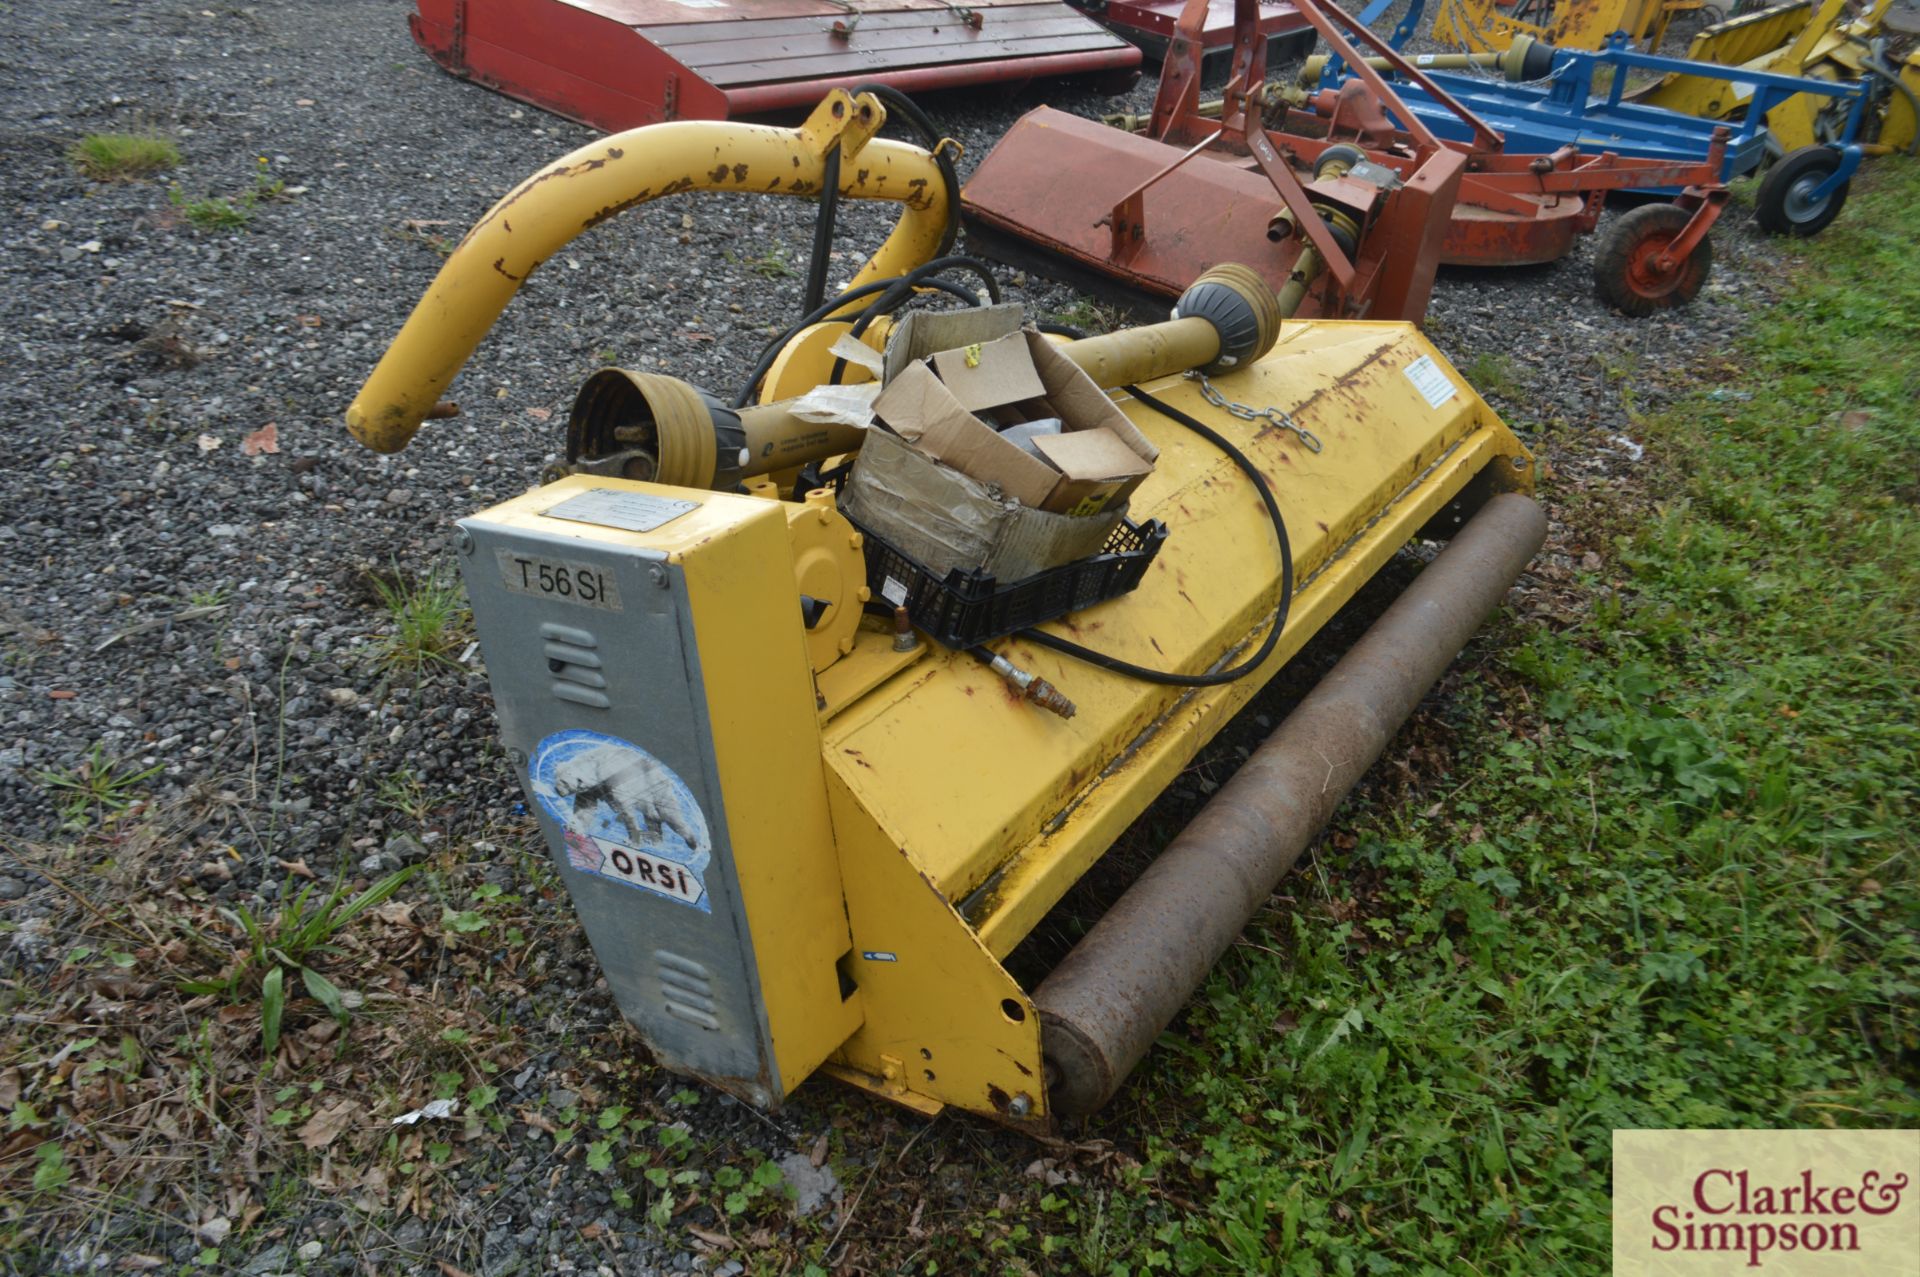 Orsi T56Si 1.9m hydraulic offset verge mower. 1998. Serial number 5733. * - Image 2 of 6